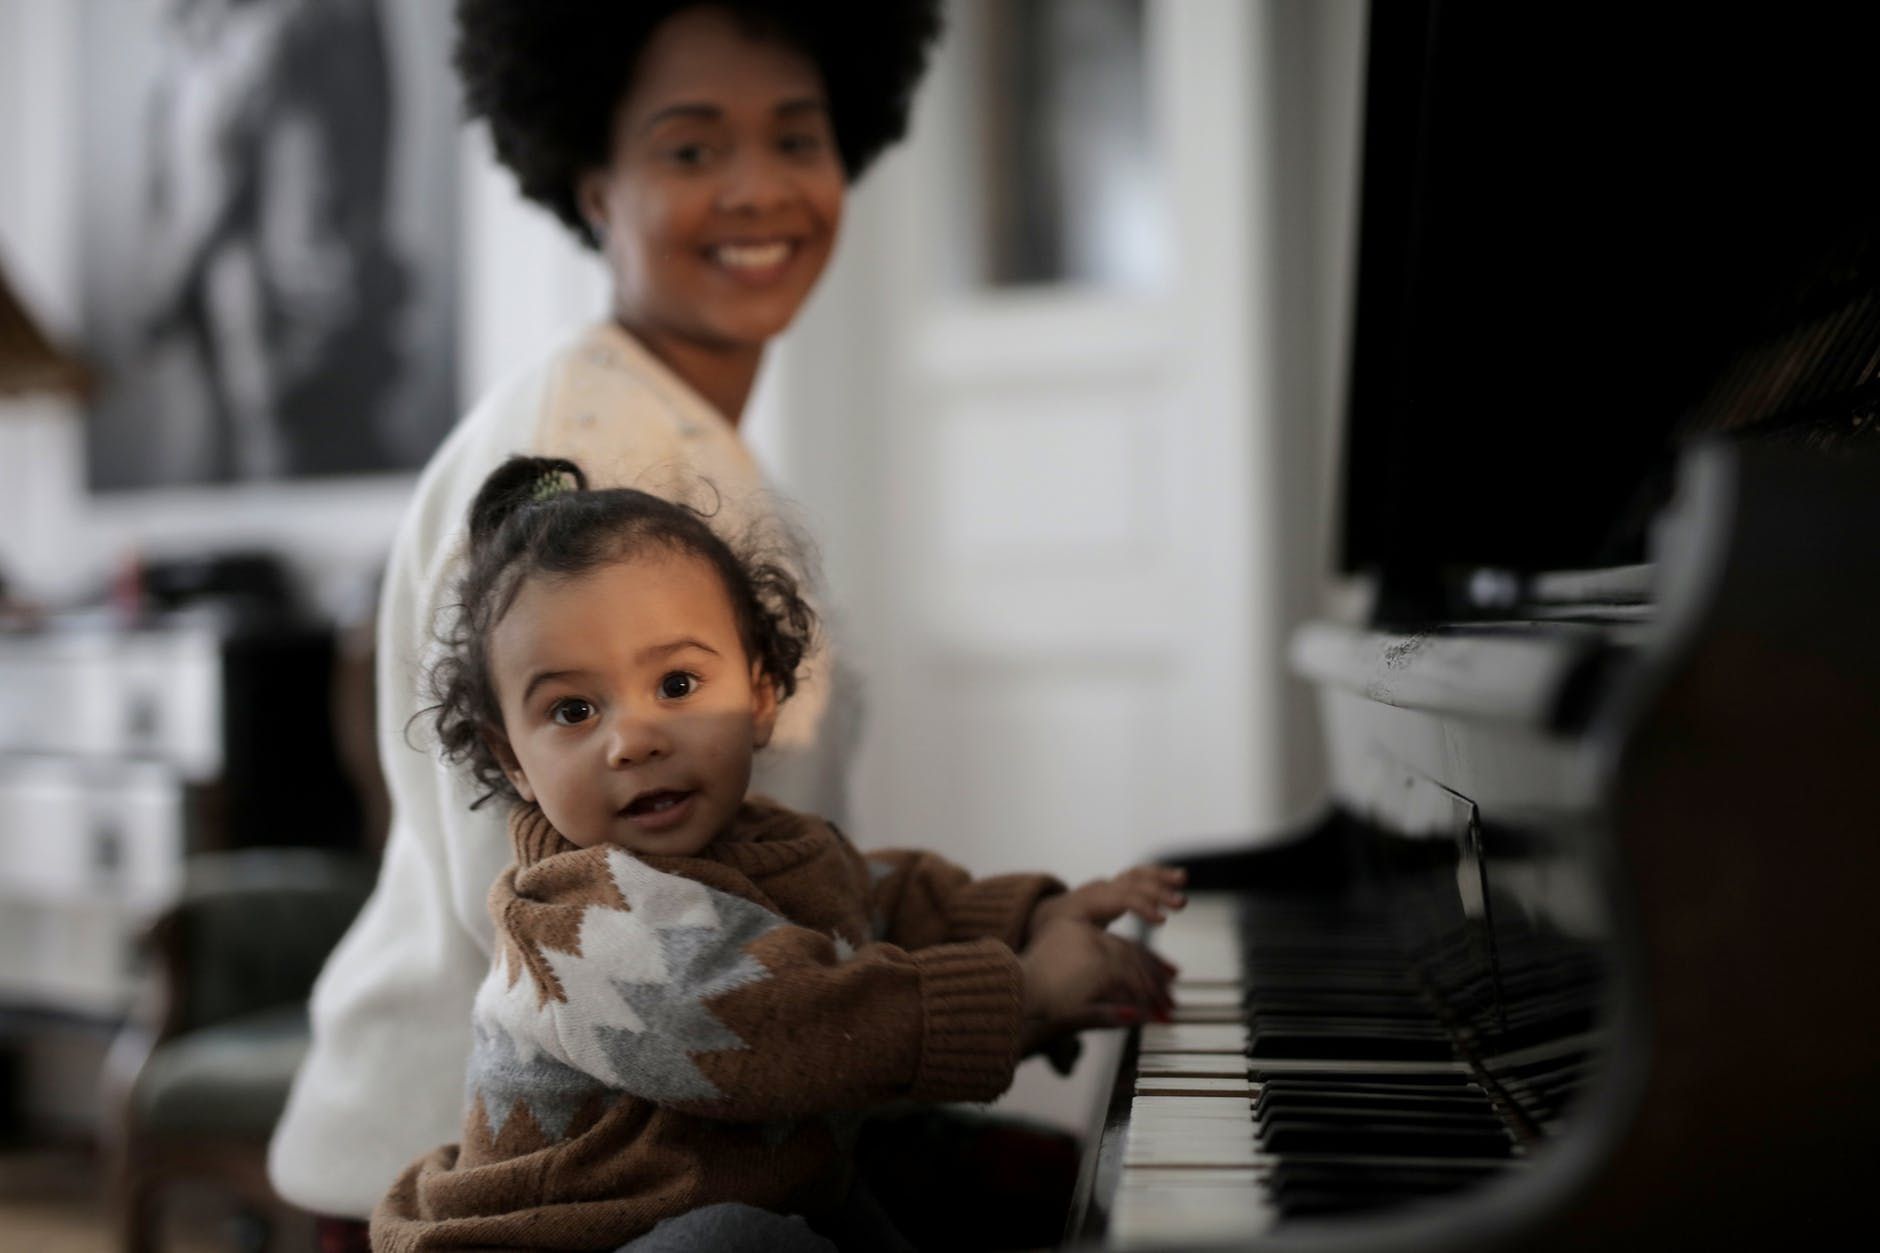 babies who love music might have a higher than average IQ